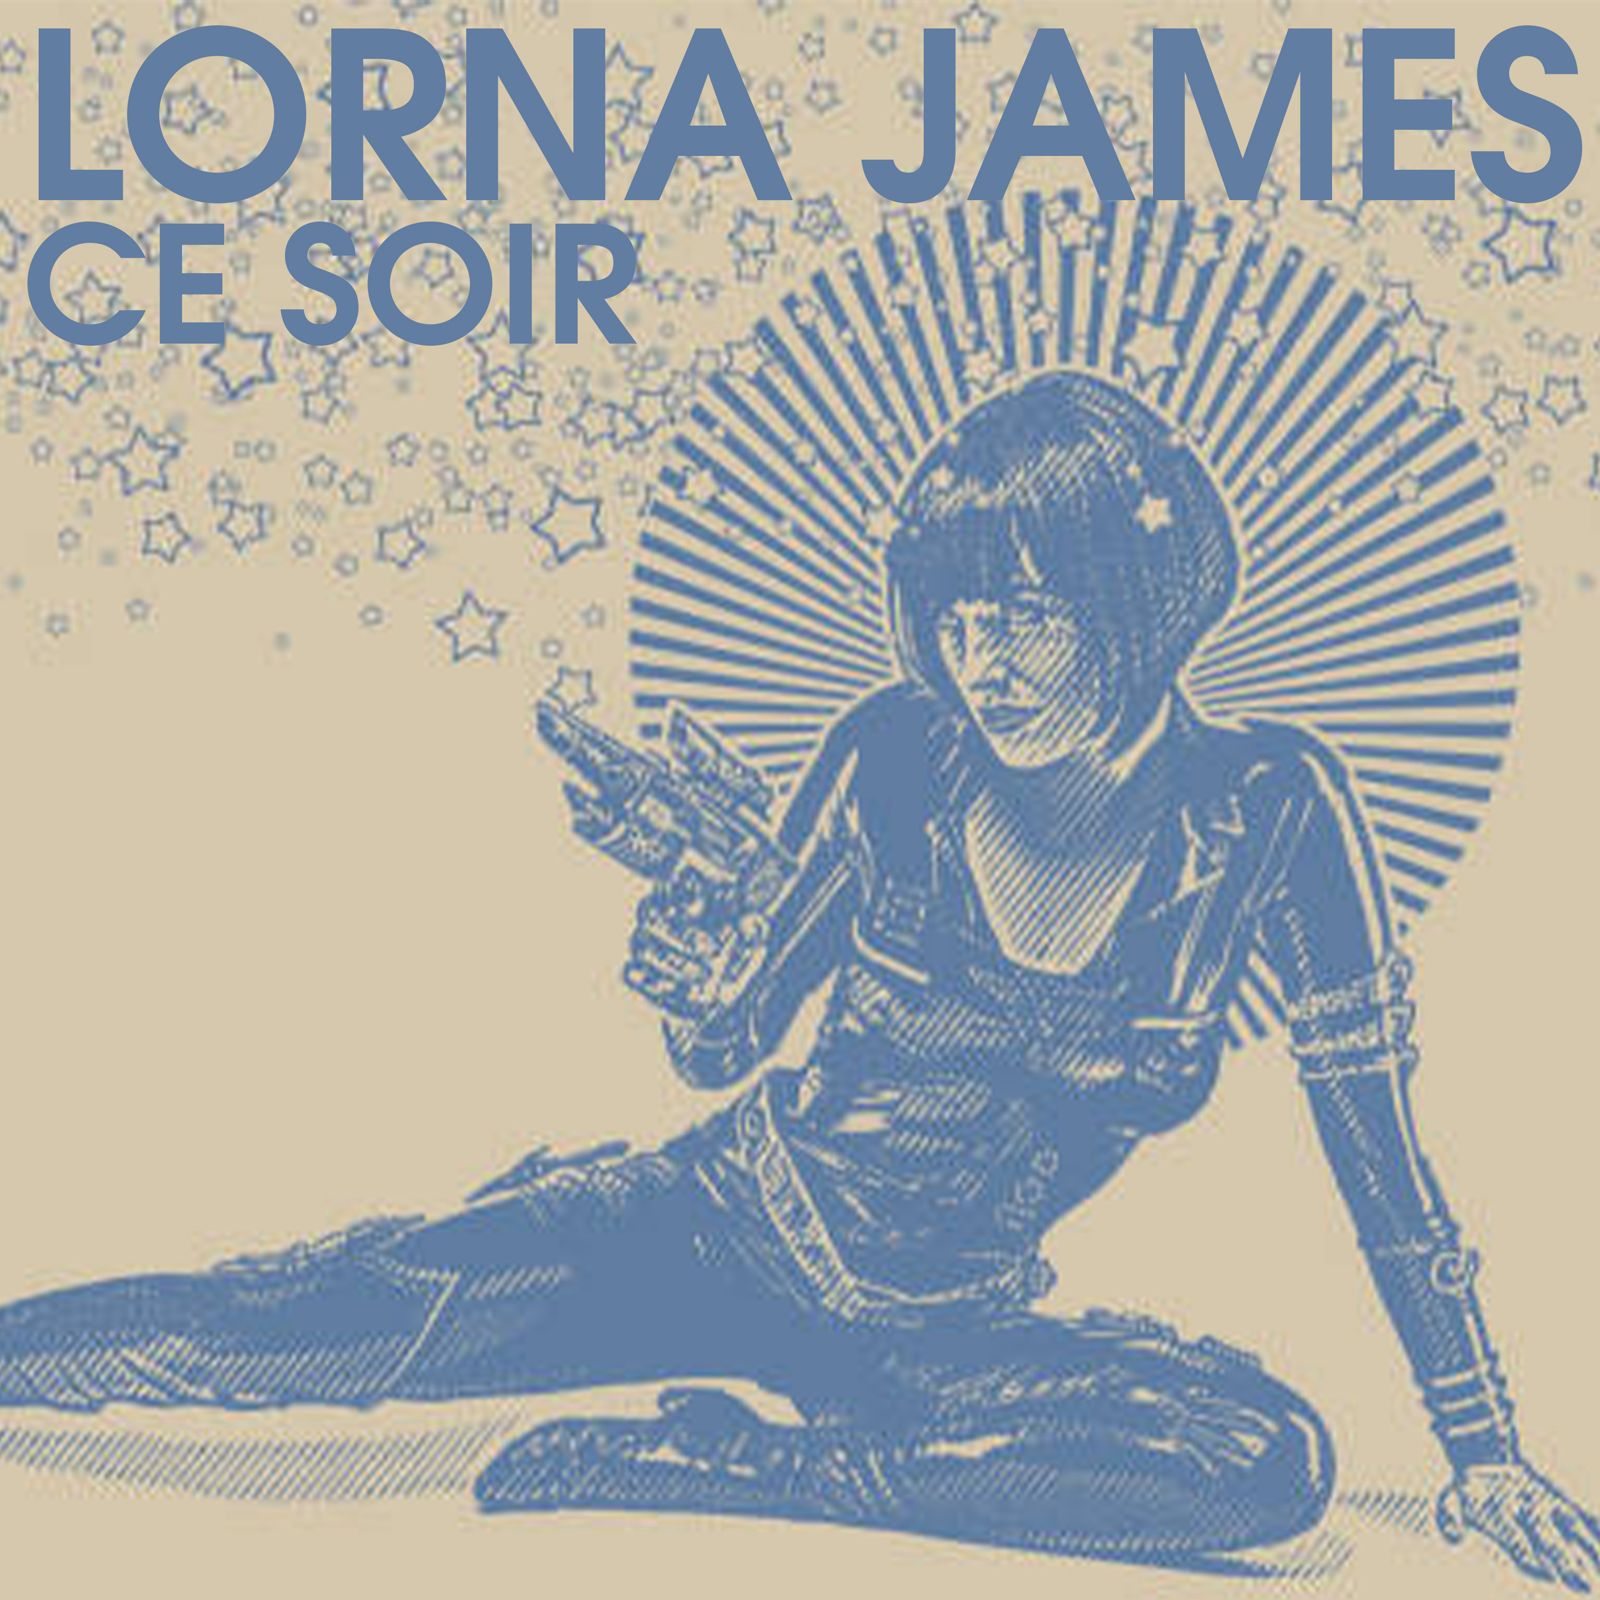 From Classical Roots to Cutting-Edge Electronic Music: Lorna James Shines with 'Ce Soir'